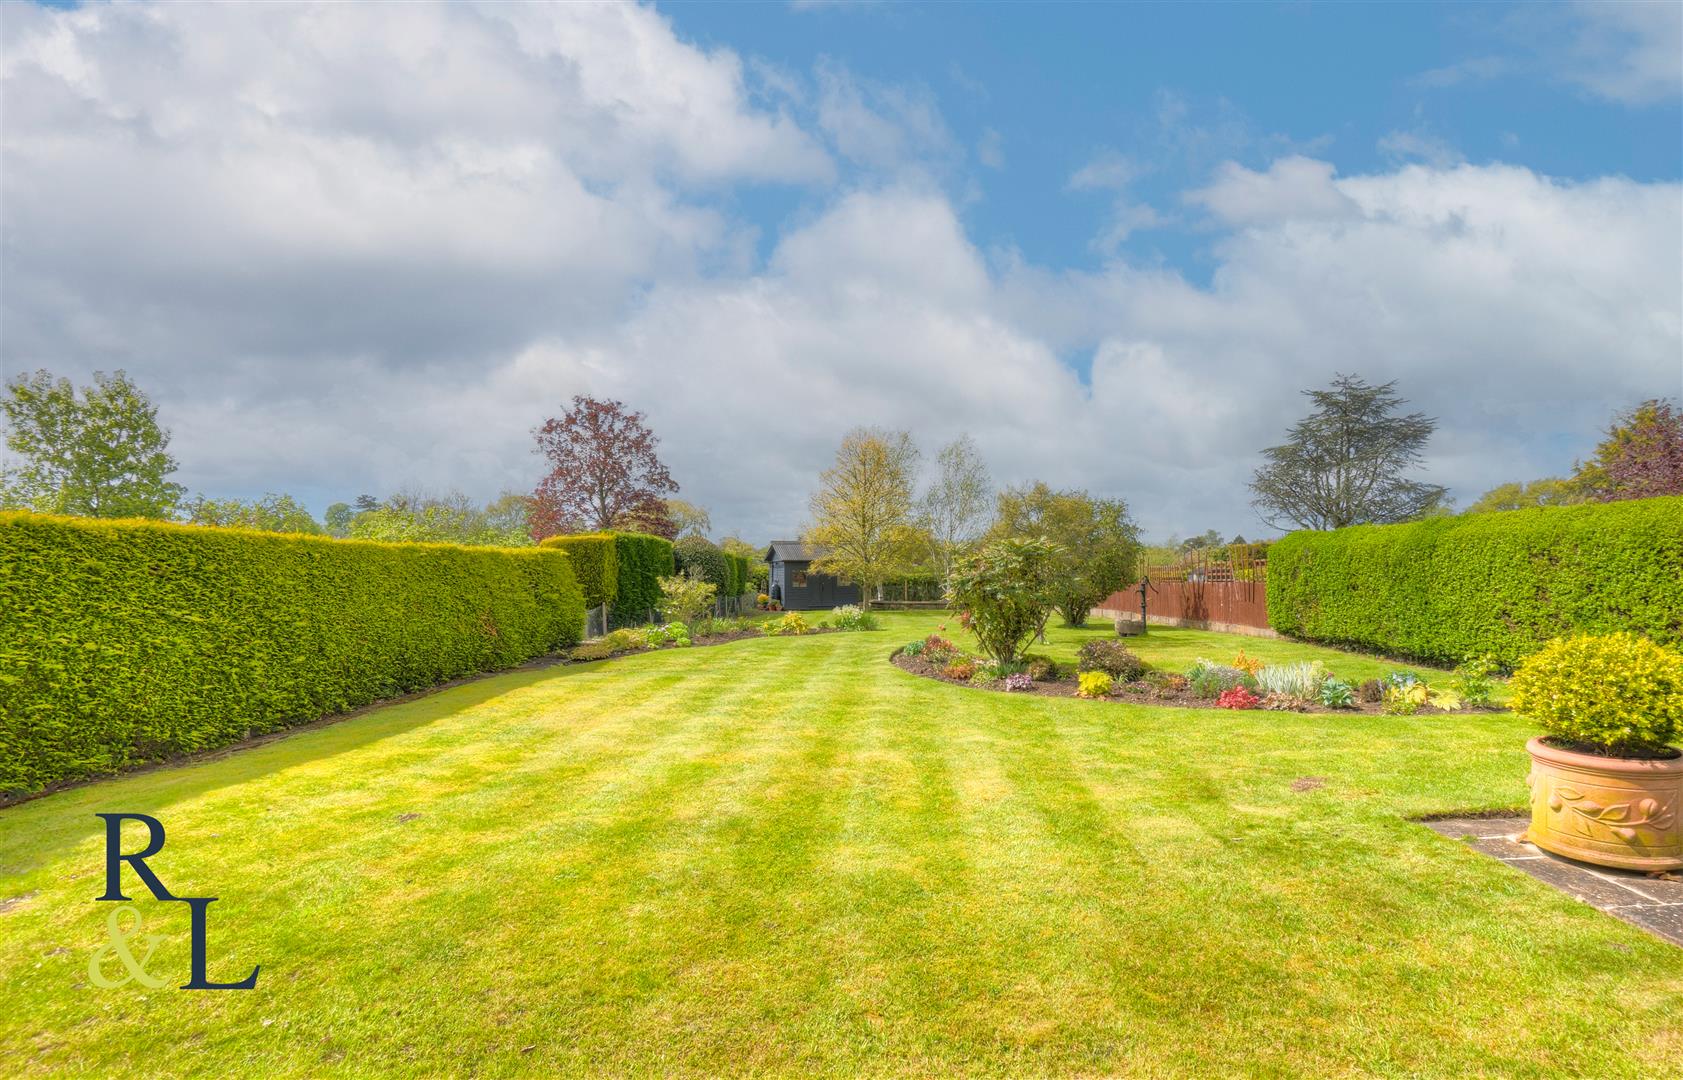 Property image for Stanton Lane, Stanton-on-the-Wolds, Nottingham